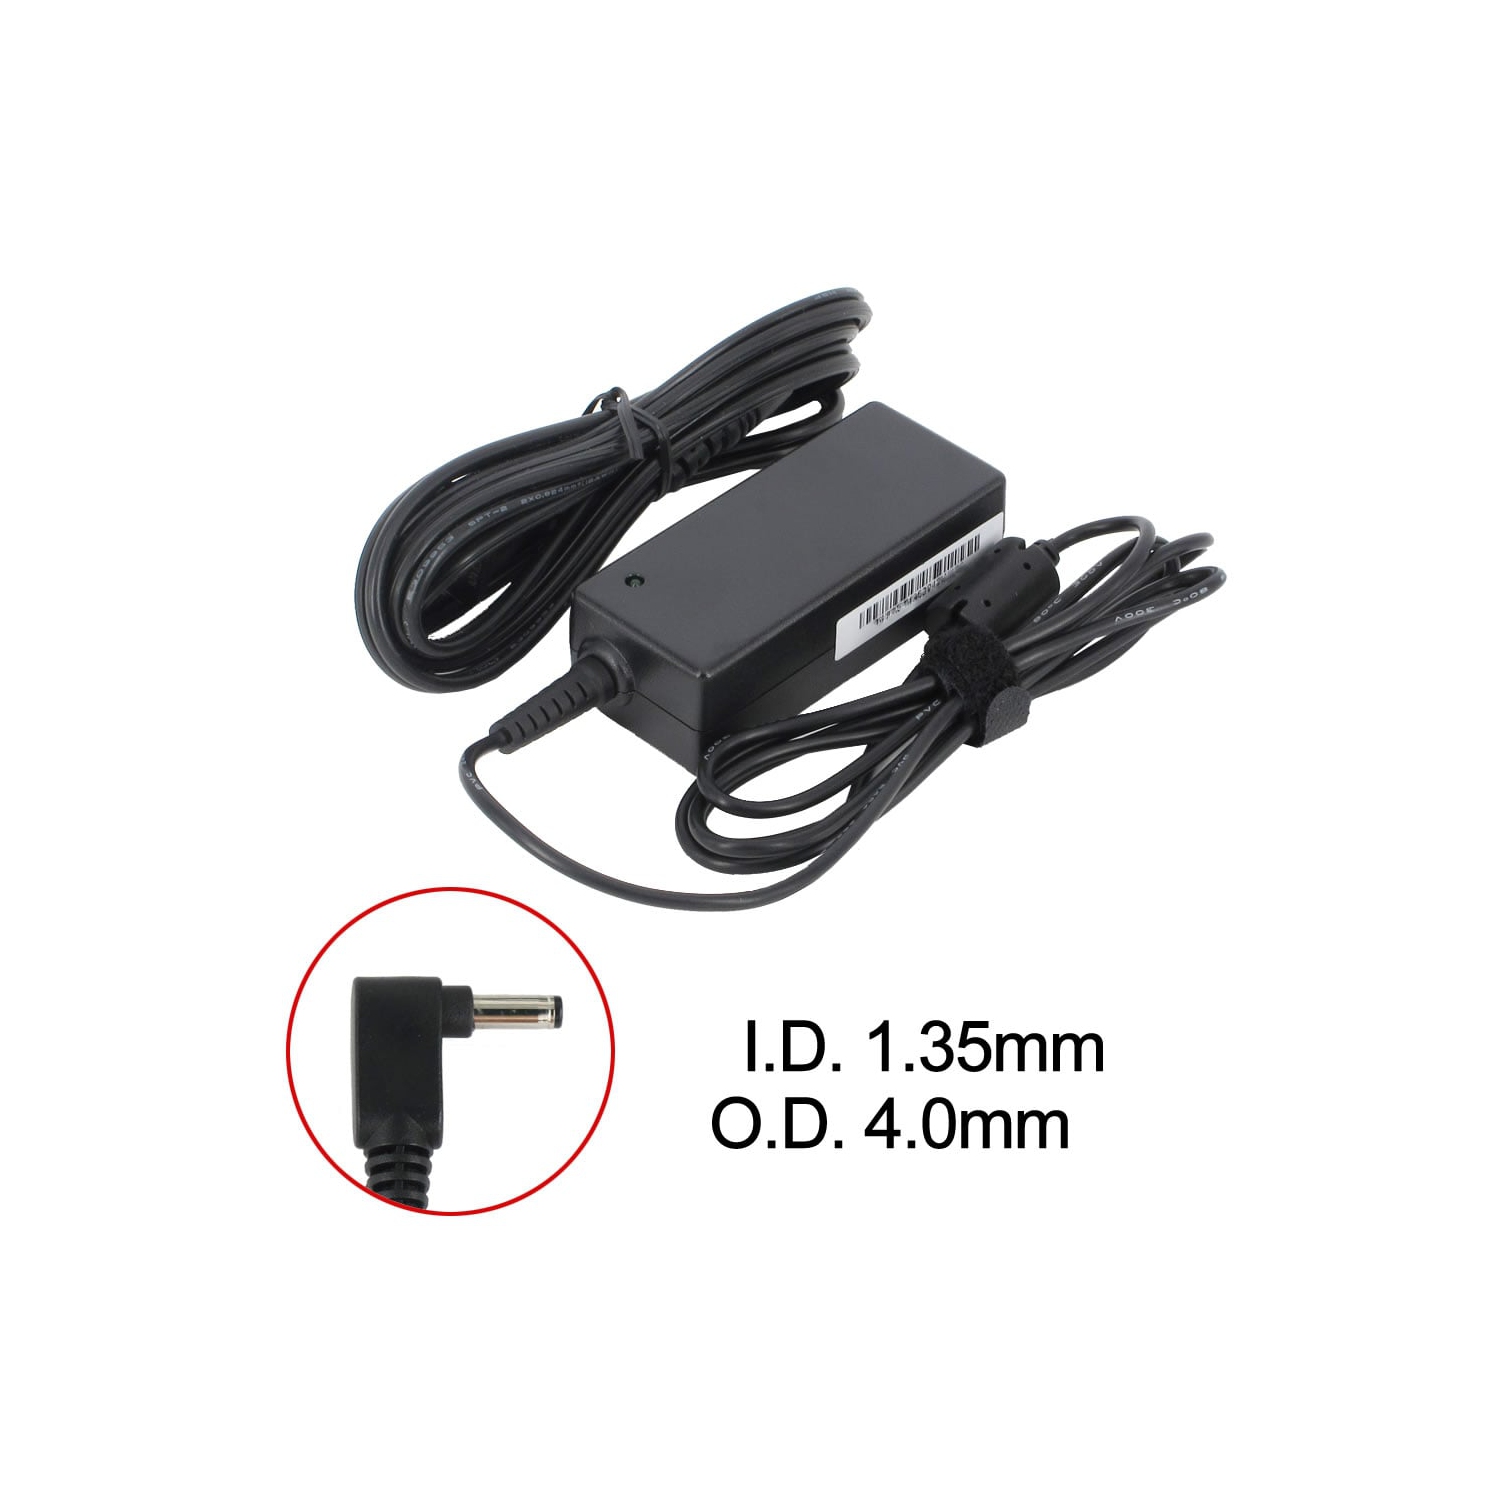 BATTDEPOT New Laptop AC Adapter for Asus X540YA-1A 0A001-00230400 0A001-00330100 EXA1206EH